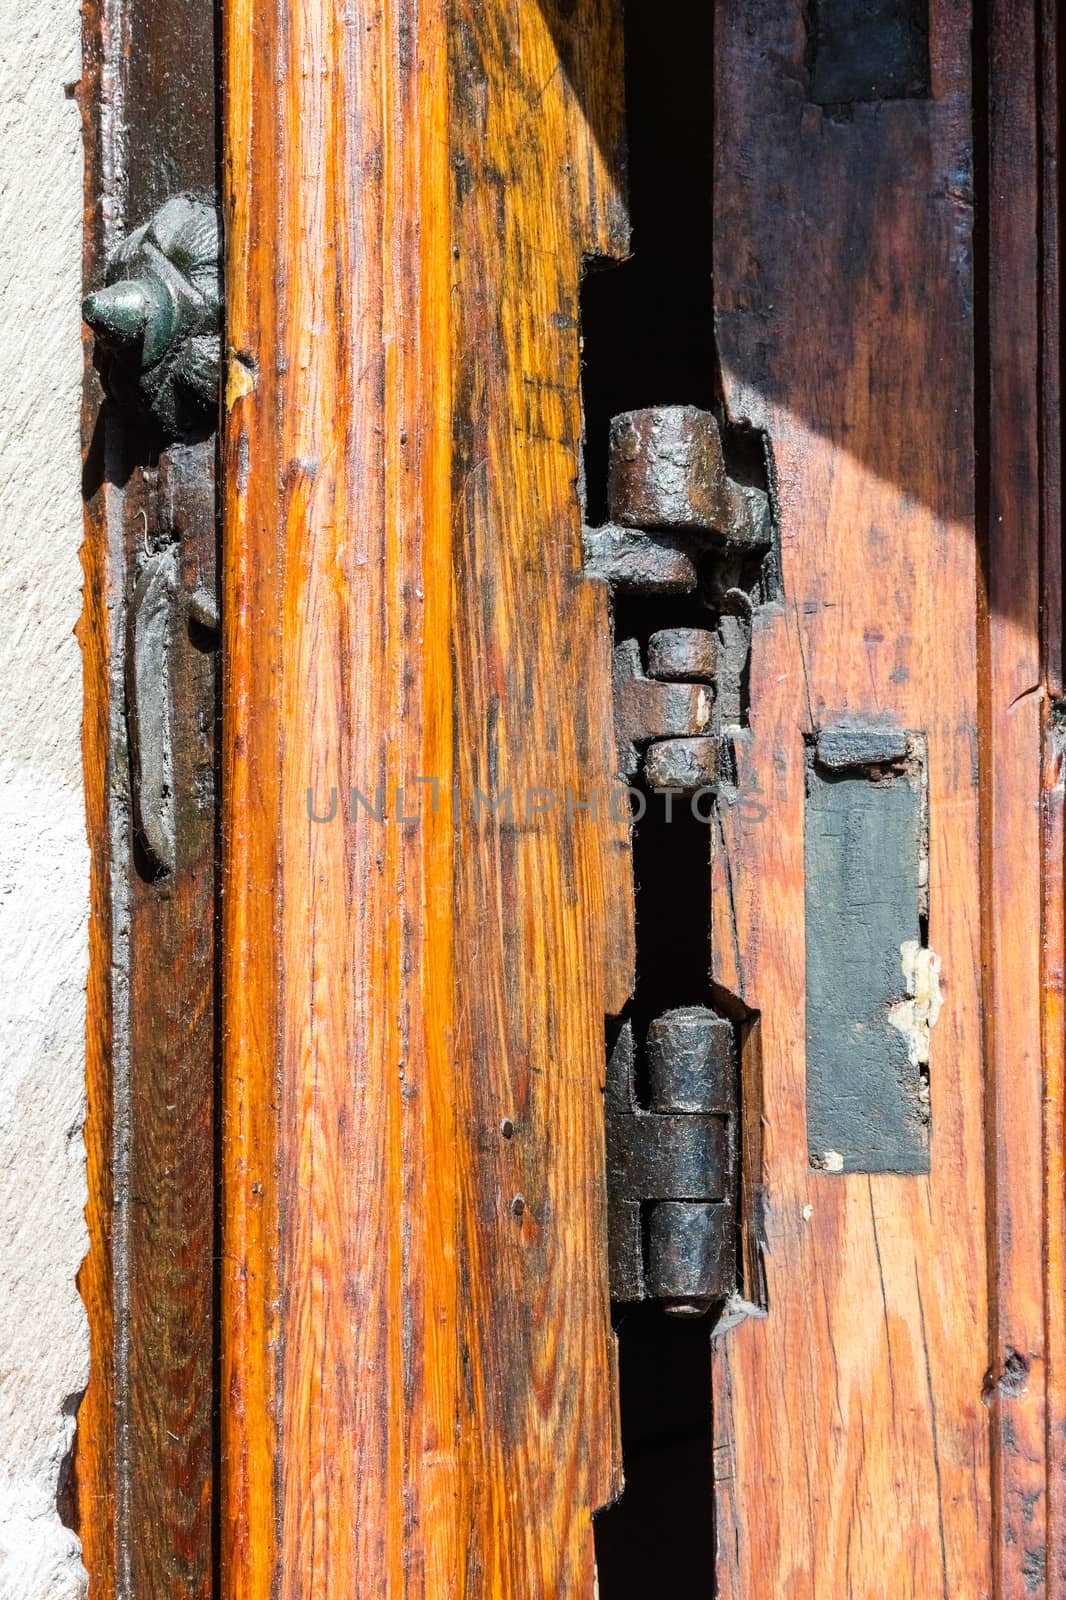 Old wood texture and hinge the door by hanusst